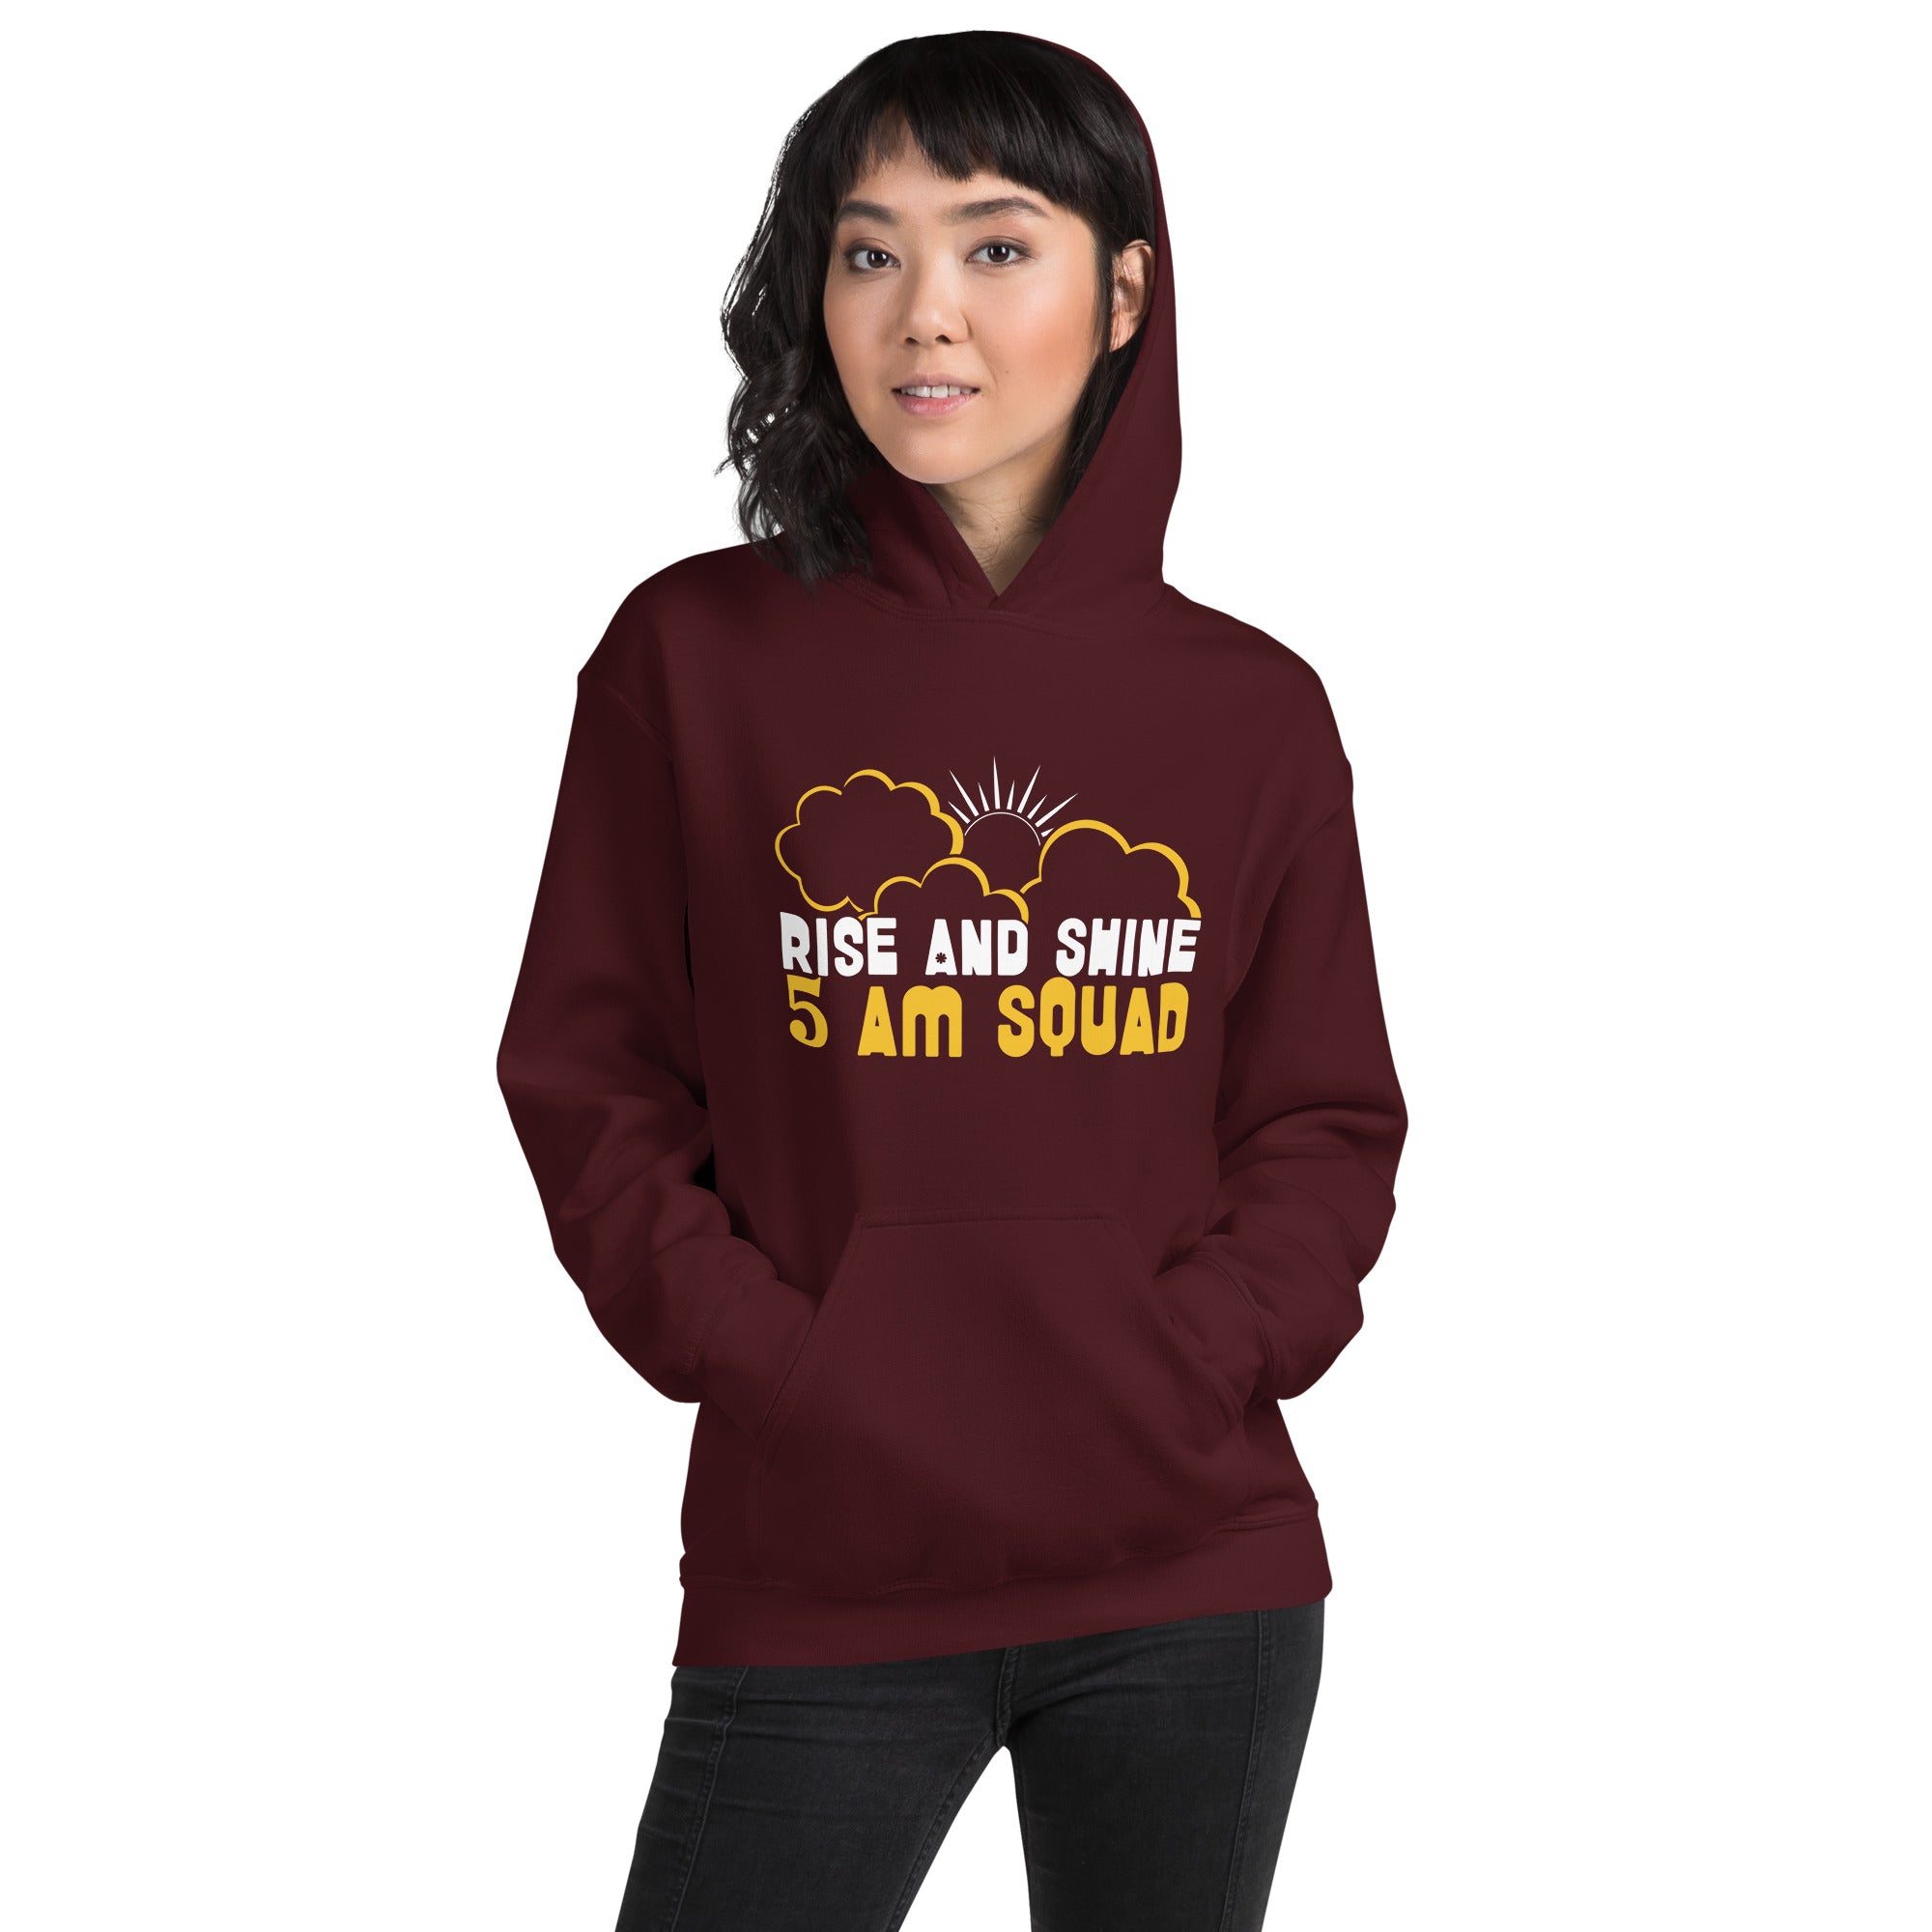 Rise And Shine 5 Am Squad Gym Fitness Training Workout Exercise Crossfit 5 Am Squad Women's Hoodie